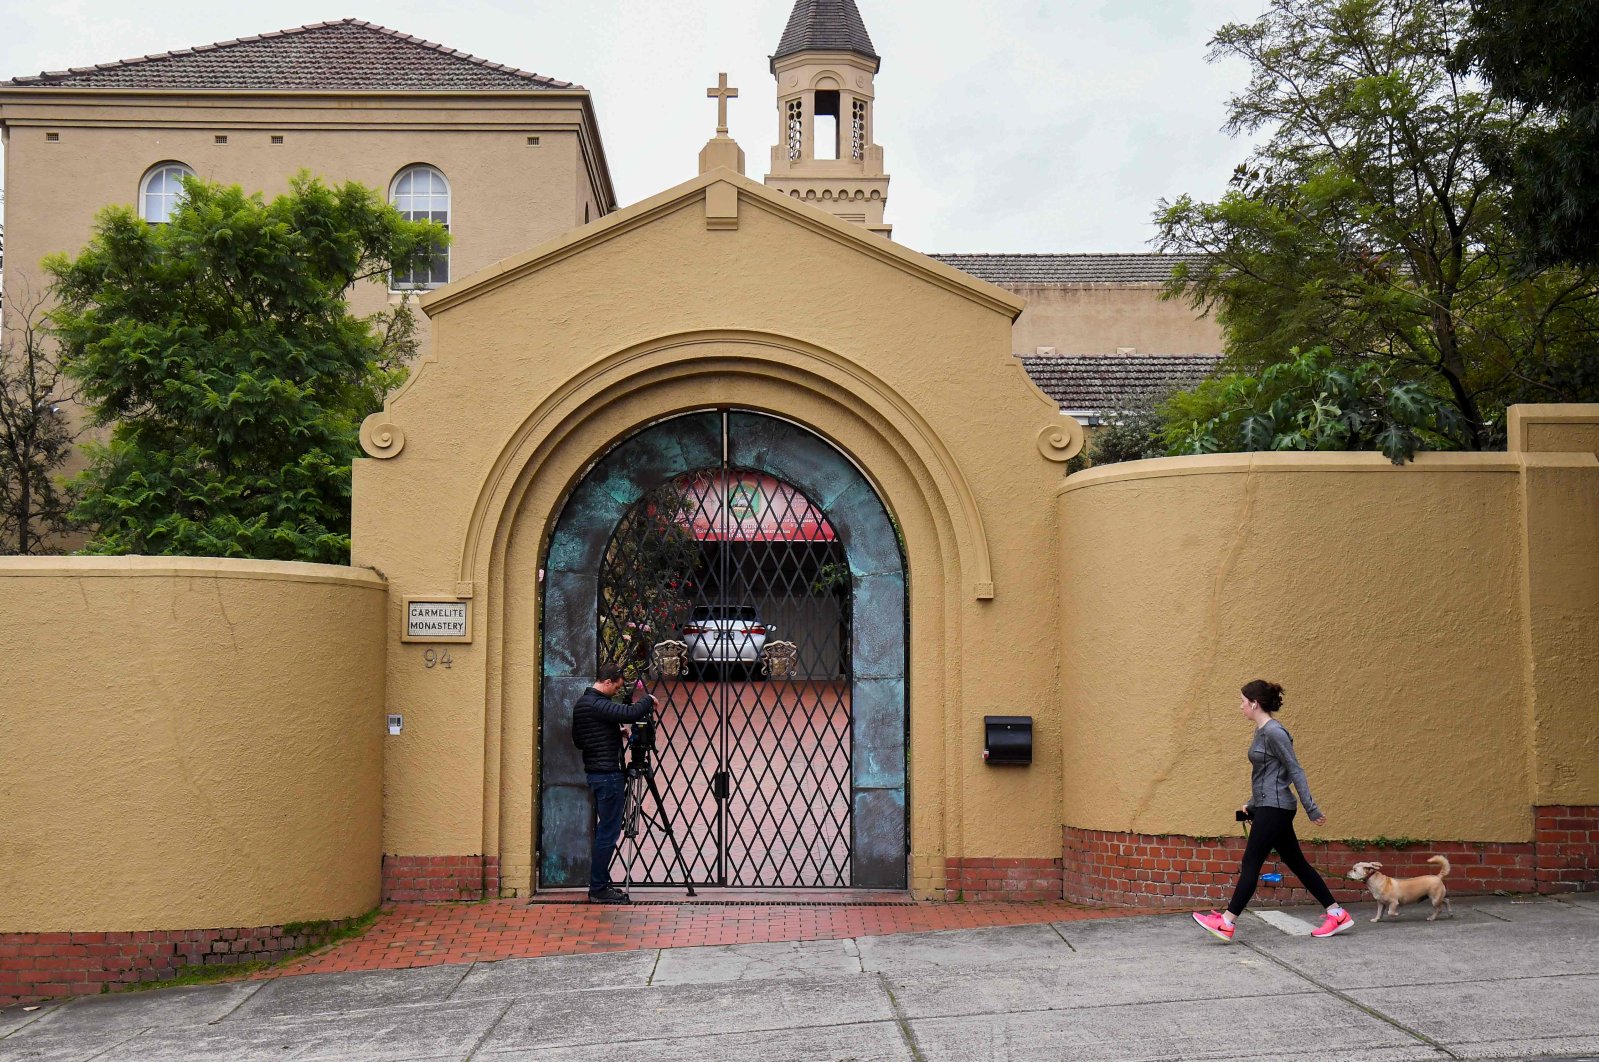 A woman walks her dog past the Carmelite Monastery in Melbourne, Australia, Tuesday, April 7, 2020, where Cardinal George Pell is staying after having been released from Barwon Prison earlier in the day. (AFP Photo)